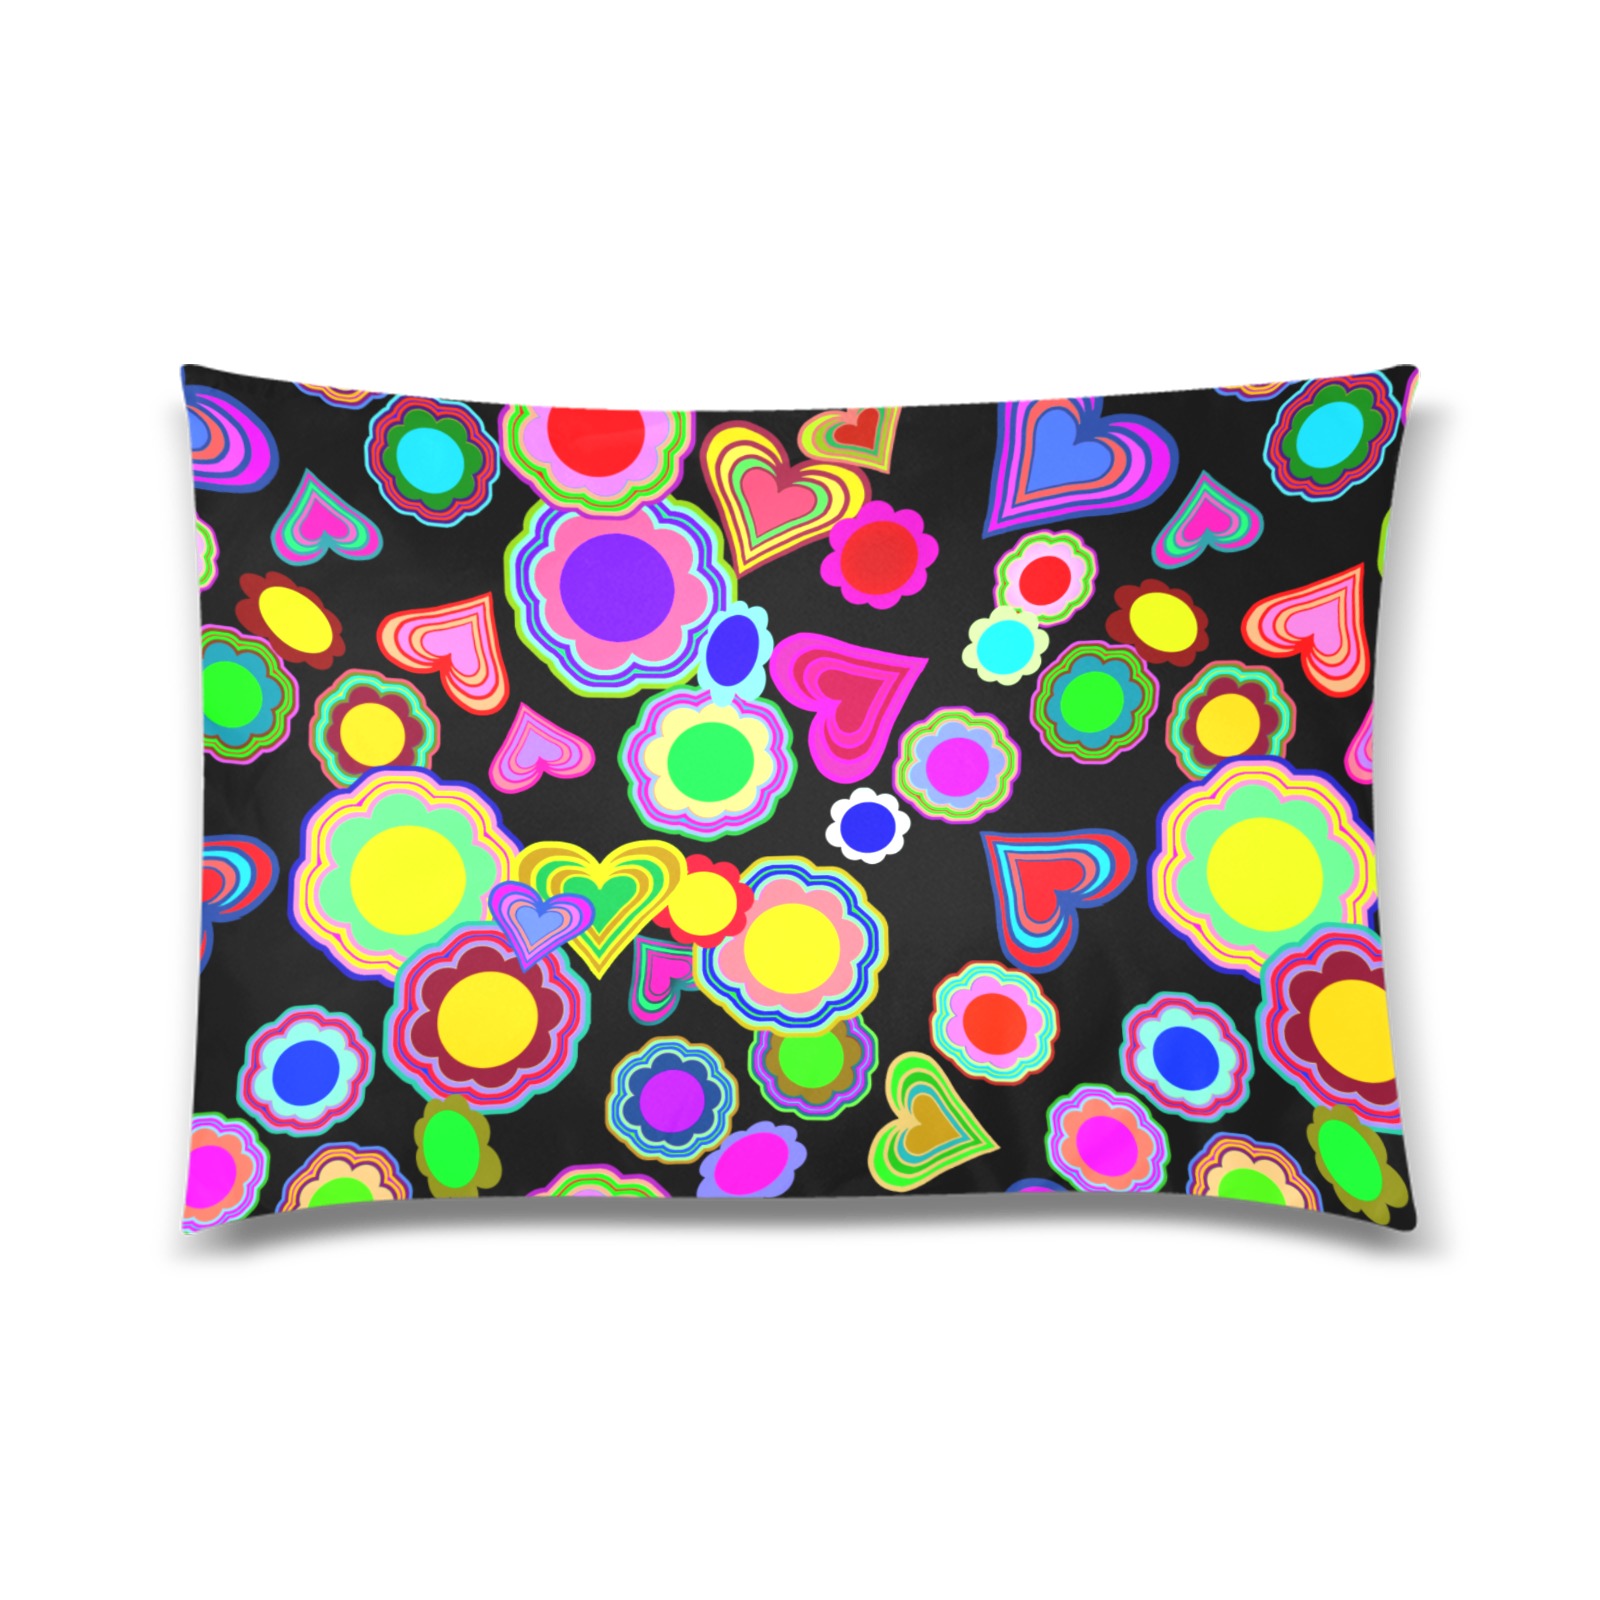 Groovy Hearts and Flowers Black Custom Zippered Pillow Case 20"x30" (one side)